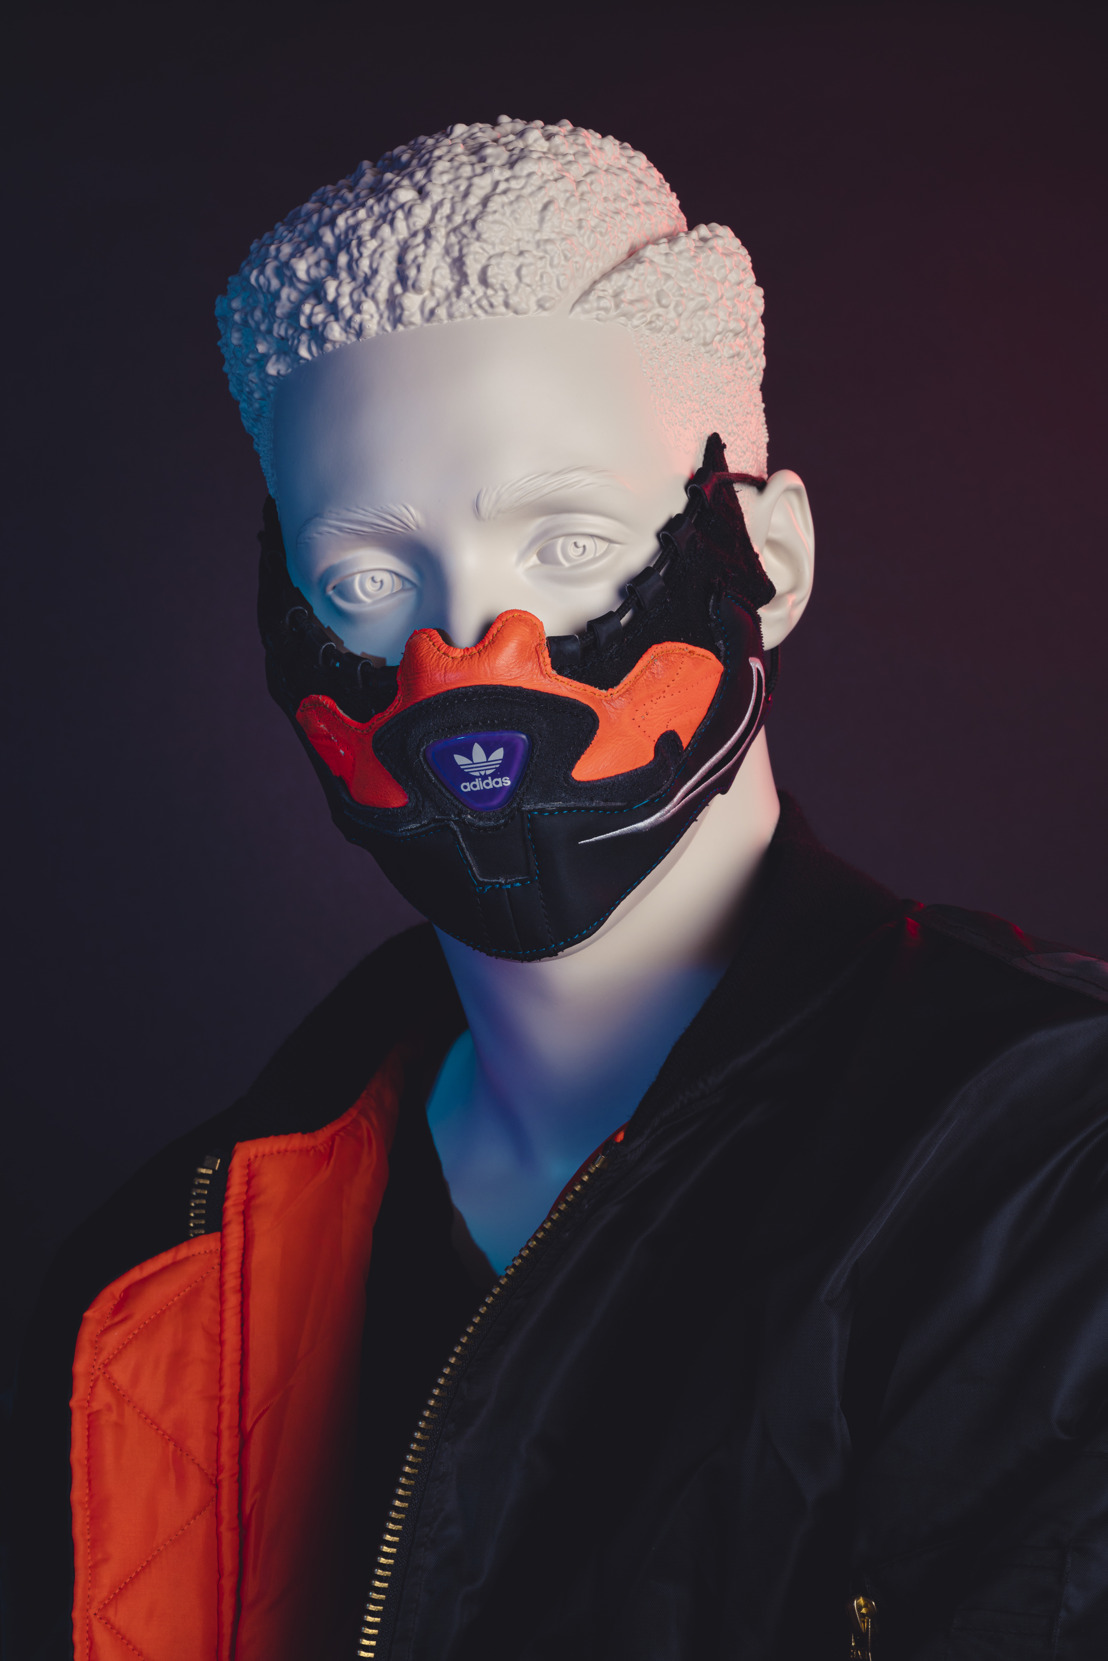 WeWantMore emphasises the importance of a designer’s mindset in a post-corona society by reimagining old sneakers as face masks